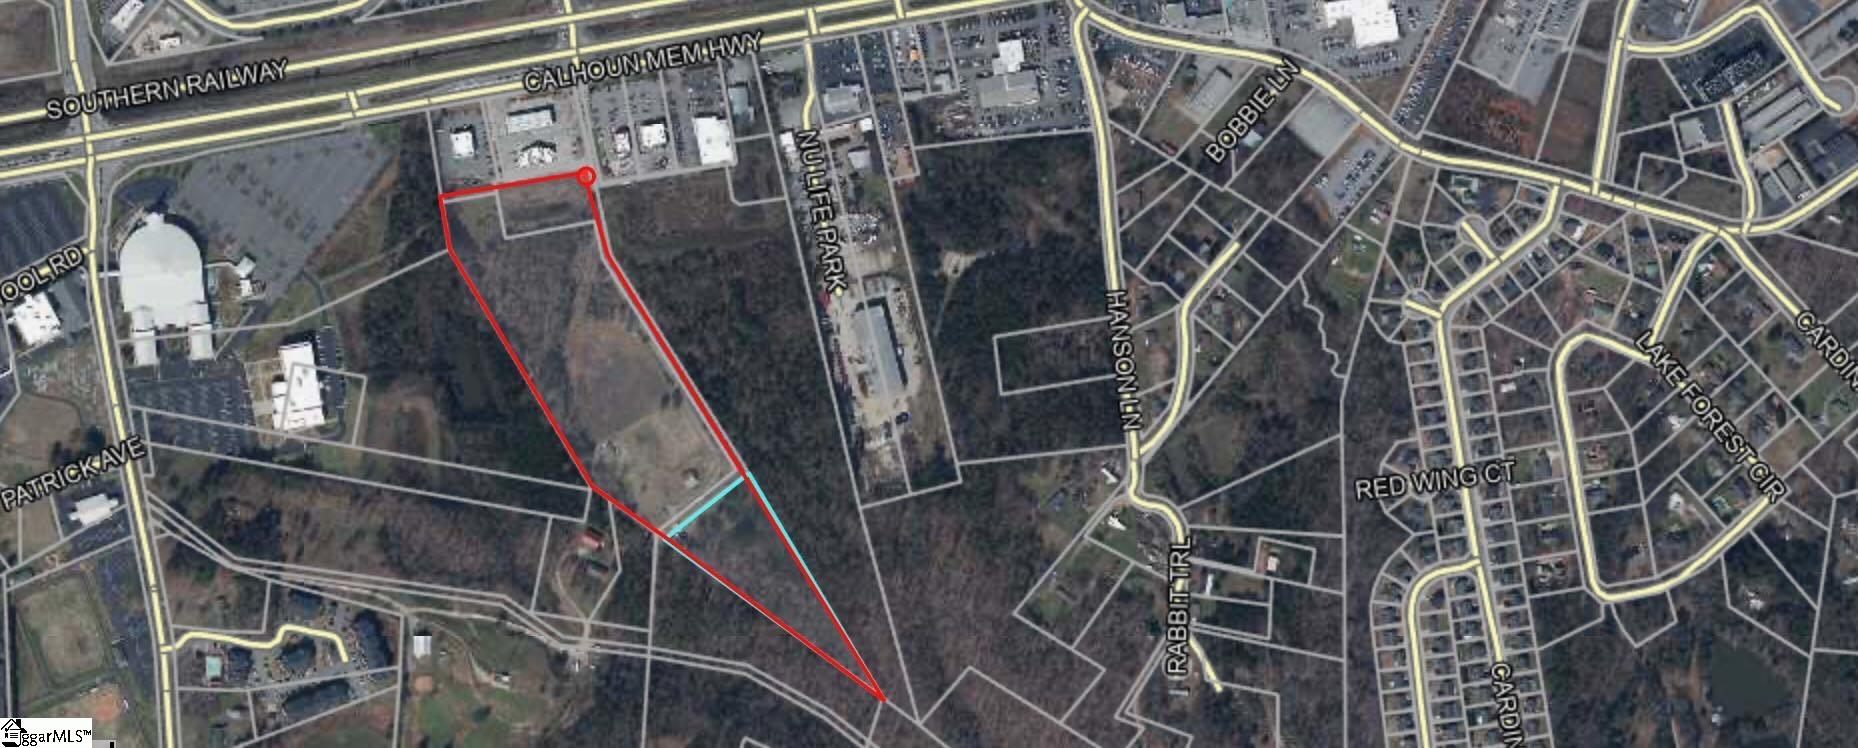 18.49 acres in the heart of the City of Easley but not in the city! Come see this acreage that is located at 123 across from Wal Mart. The property is located at the dead end road that runs between the Quik Trip and Freddy's. With a traffic count of over 38,000 vehicles and an average income in Easley of almost $60,000 a year what a perfect place for development! Sewer, water, and gas on site. There are several structures on the property currently a home at 2290 square feet of heated/ cooled area and over 5000 square feet total counting the basement. There is an electronic gate at the entrance to the property with fencing around part of the property.